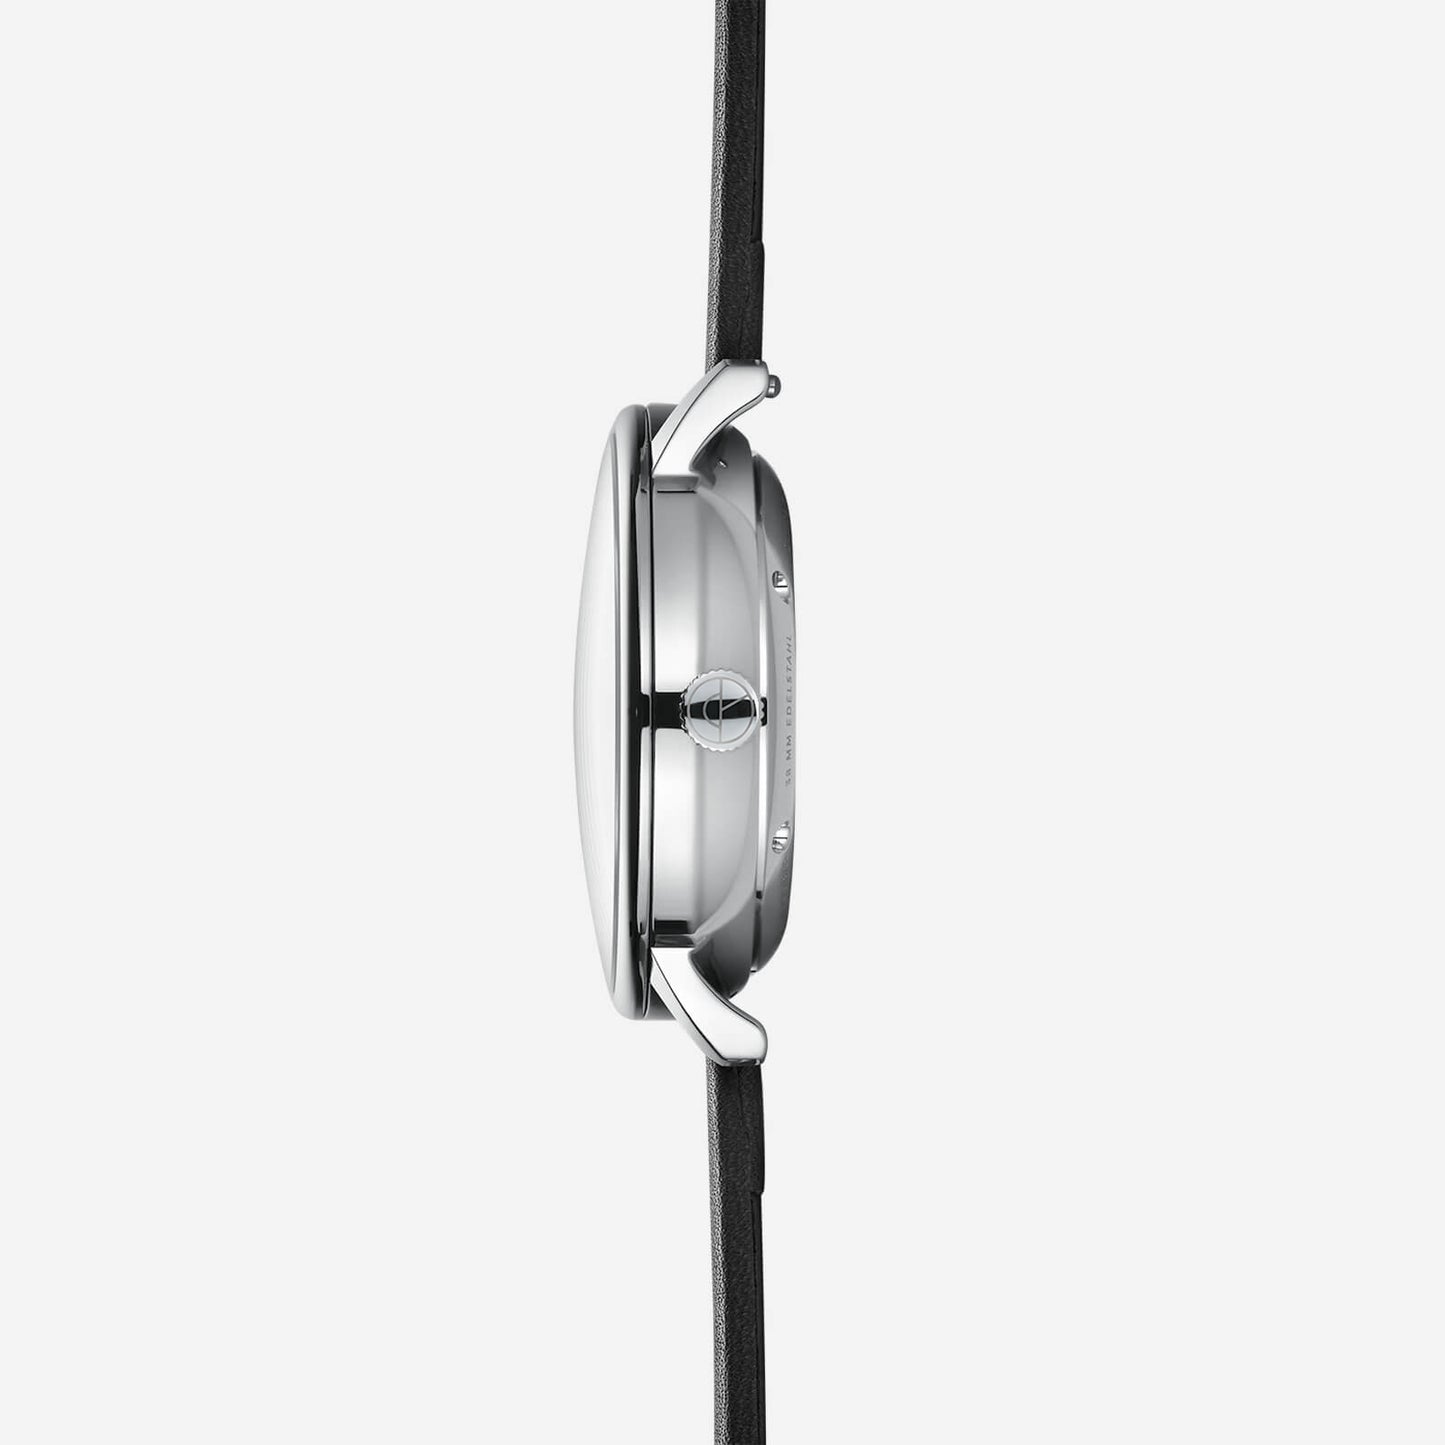 popup|Curved sapphire crystal|The absolutely scratch-resistant and double anti-reflective sapphire crystal - the premium class of watch crystals - ensures a clear view.